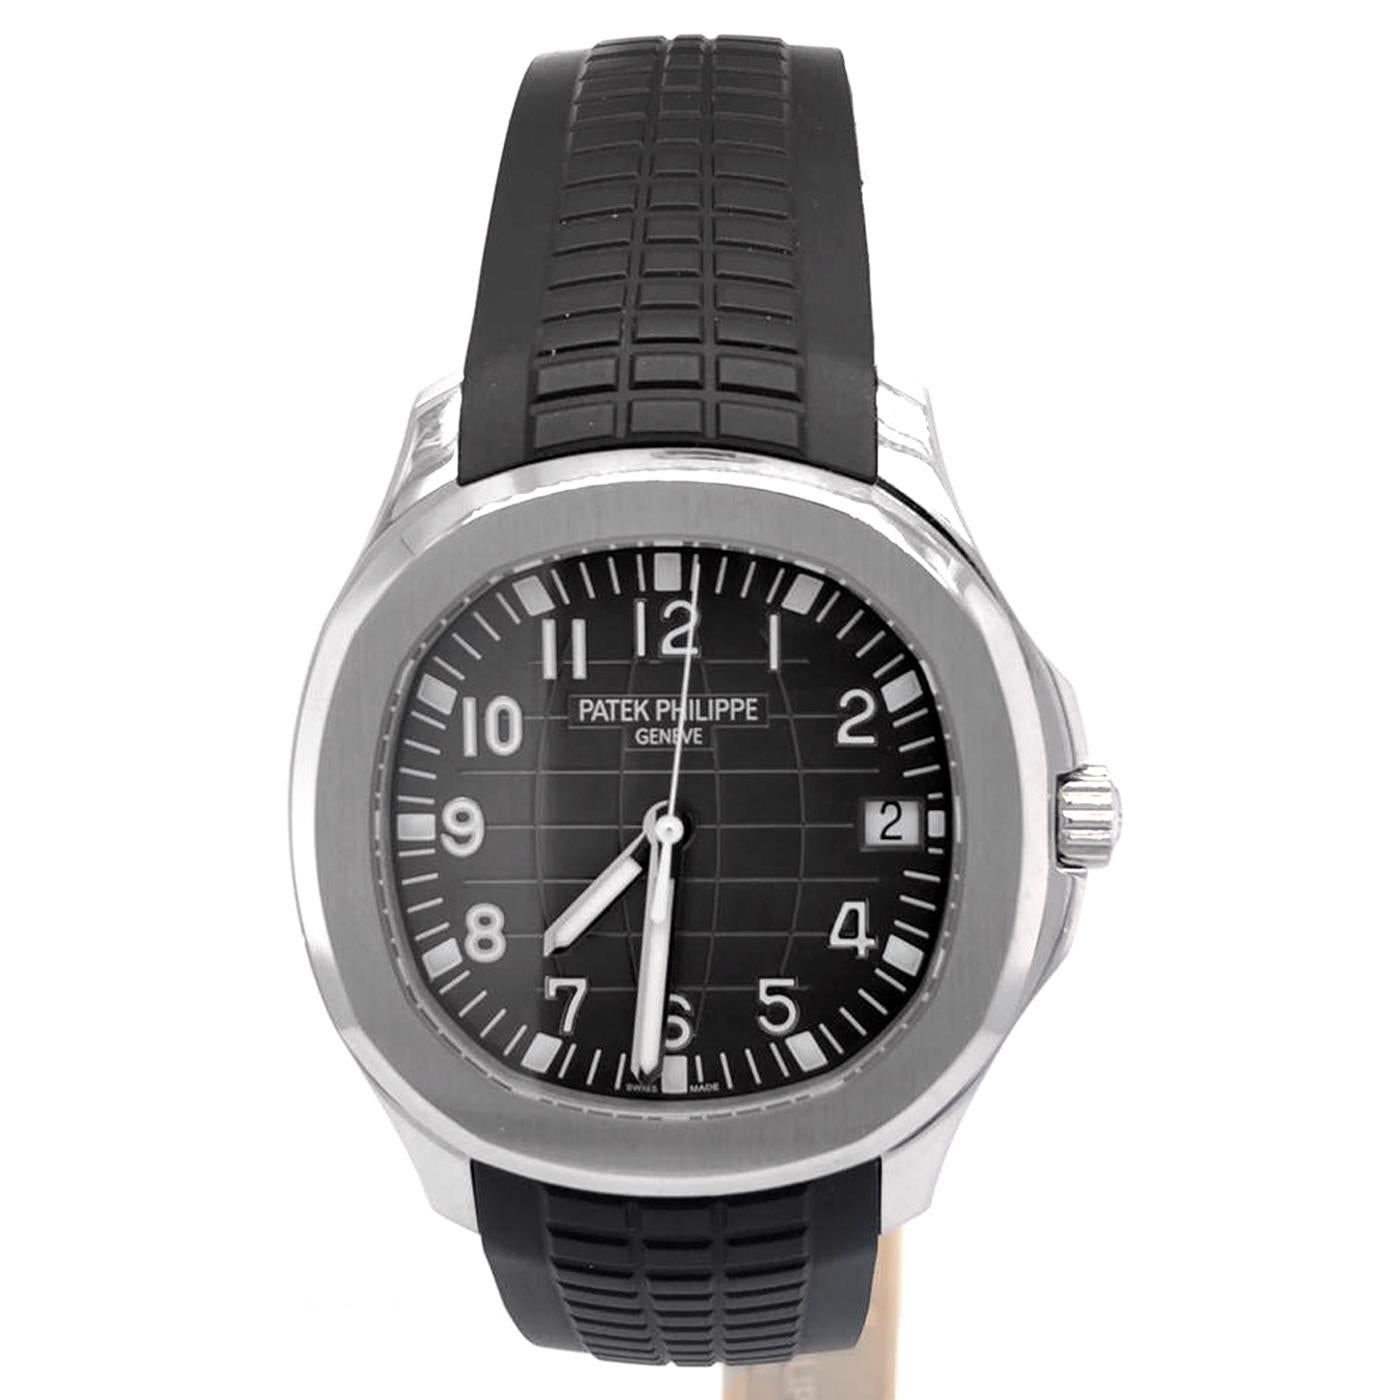 Patek Philippe Aquanaut's (51671A001) self-winding automatic watch, features a 40mm stainless steel case surrounding a black embossed dial on a black Tropical strap with a stainless steel buckle. Functions include hours, minutes, seconds, and